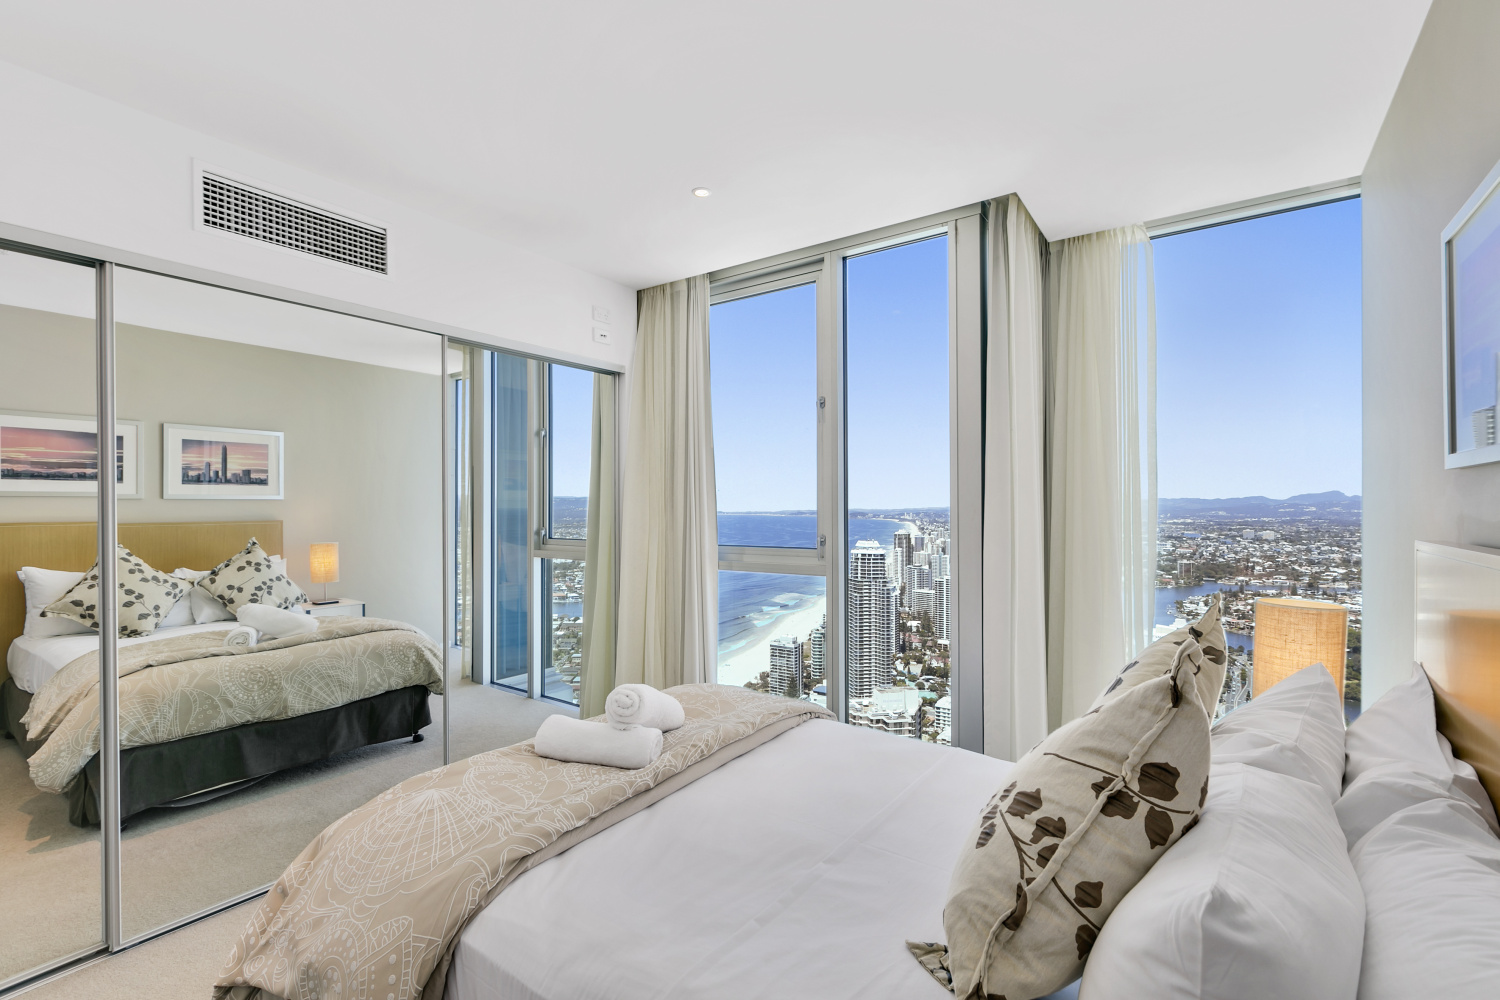 Second Bedroom with views